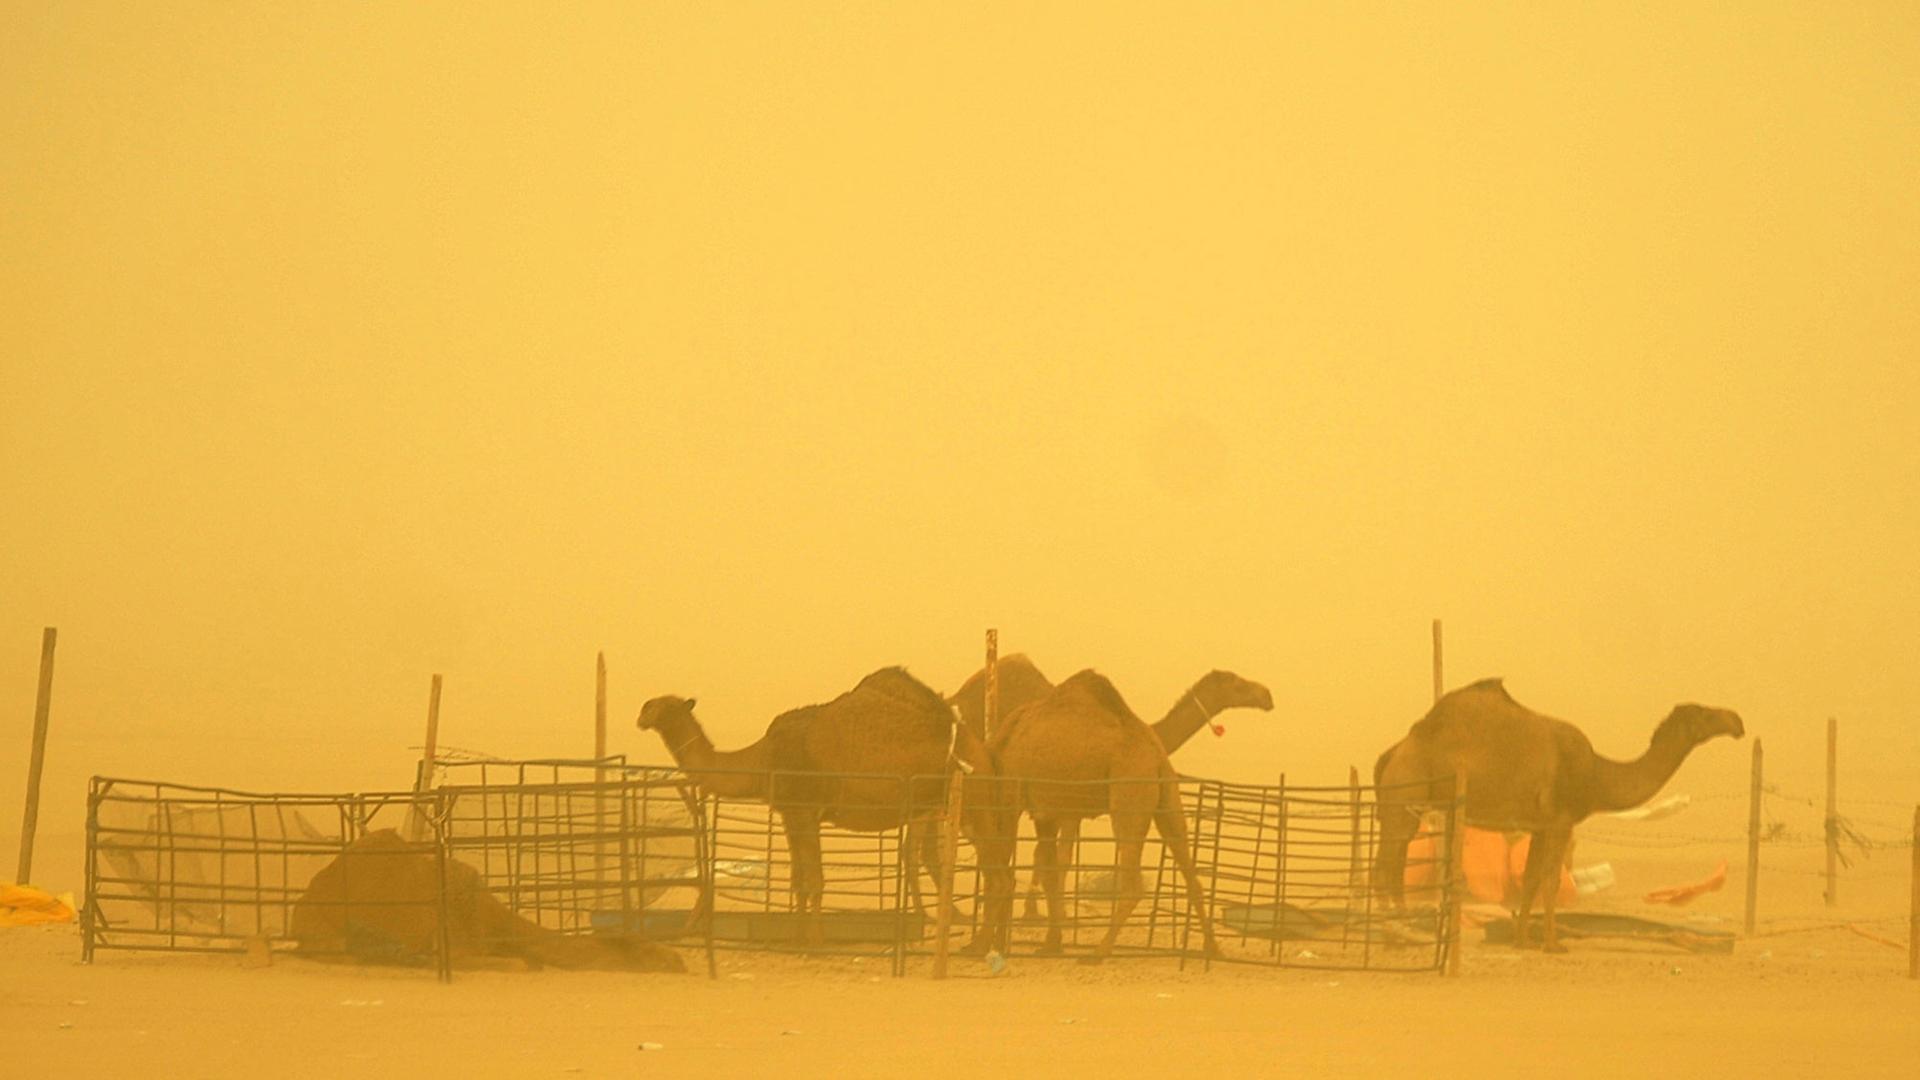 A photo made available on 18 March 2012, shows camels barely visible during a sand storm in Kuwait City, Kuwait, 17 March 2012. According to the Kuwaiti Directorate General for Civil Aviation (DGCA), Kuwait's airports operated normally on 17 March despite the low visibility caused by the sandstorm.